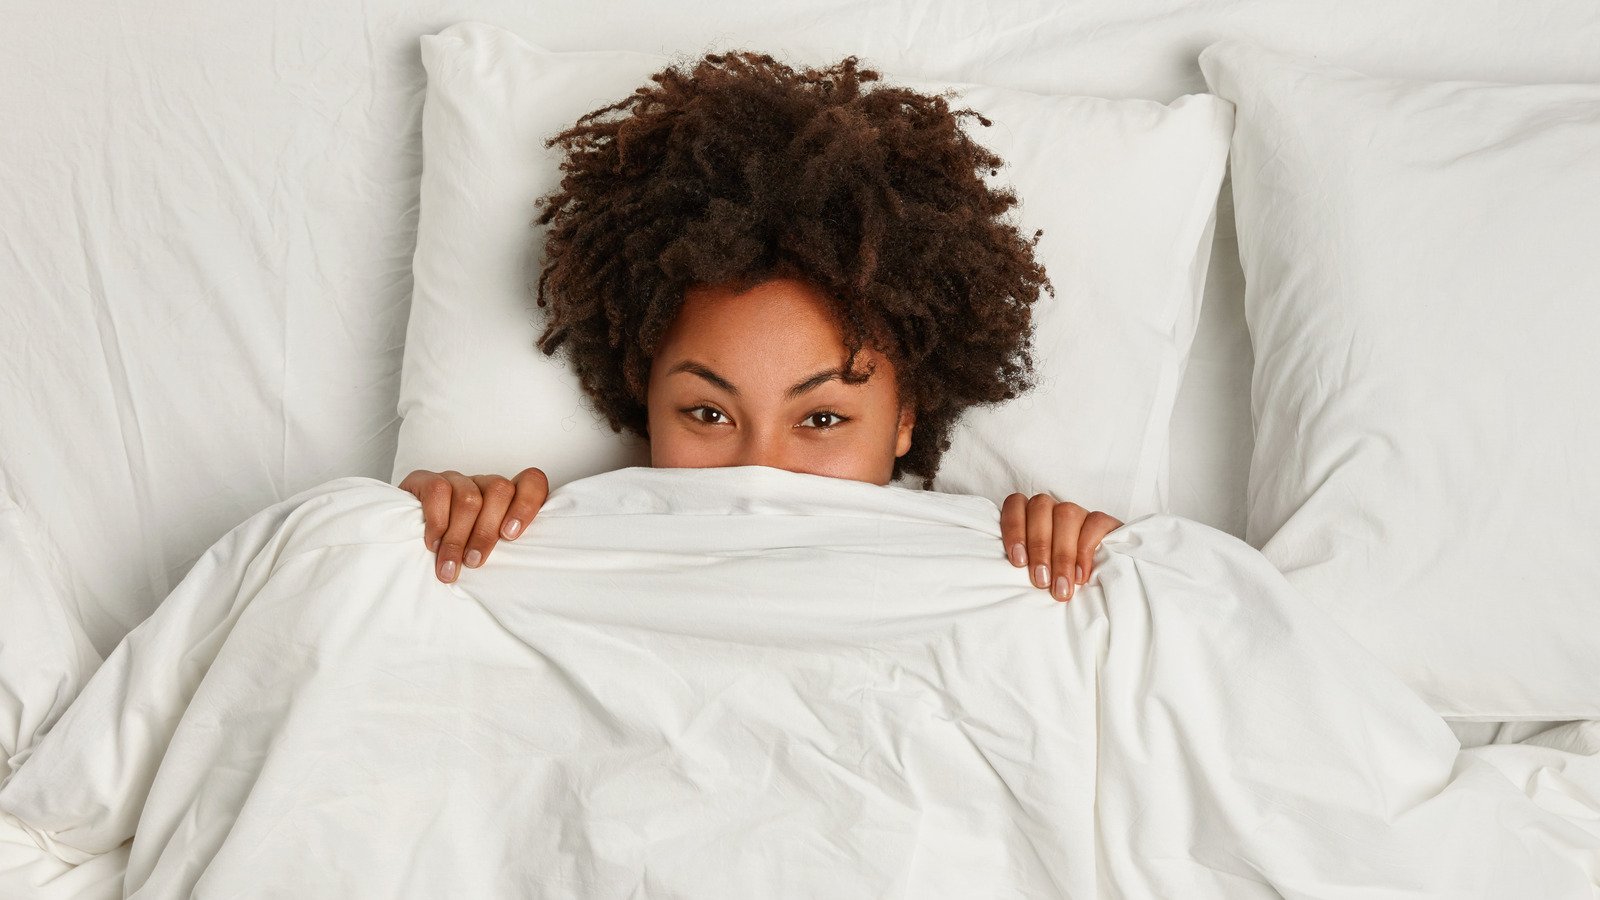 Why We Sleep With Blankets, According To Science - Health Digest